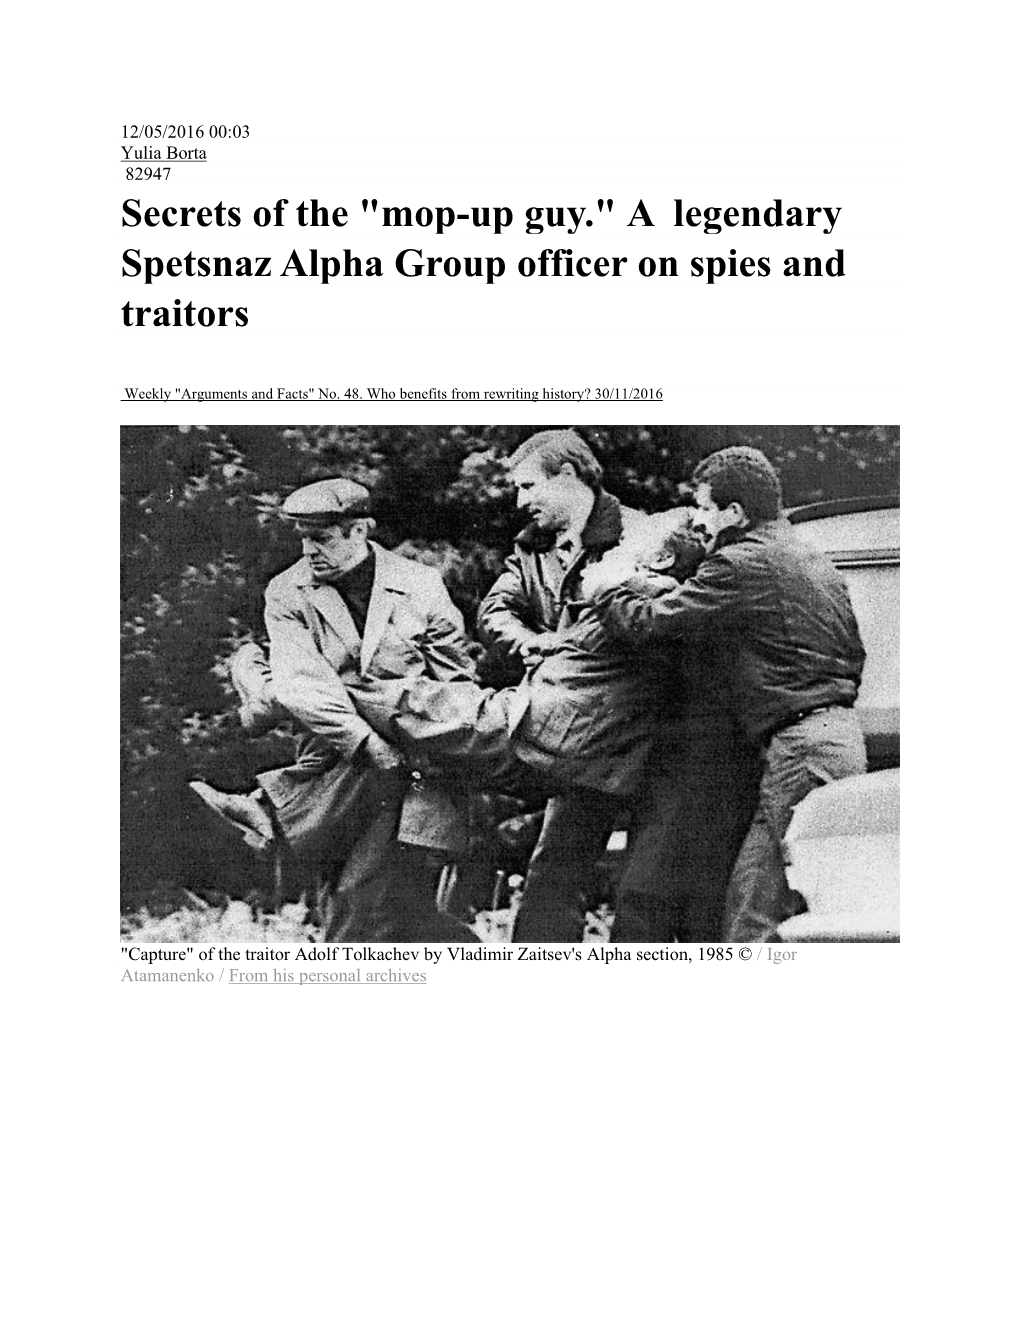 Secrets of the "Mop-Up Guy." a Legendary Spetsnaz Alpha Group Officer on Spies and Traitors